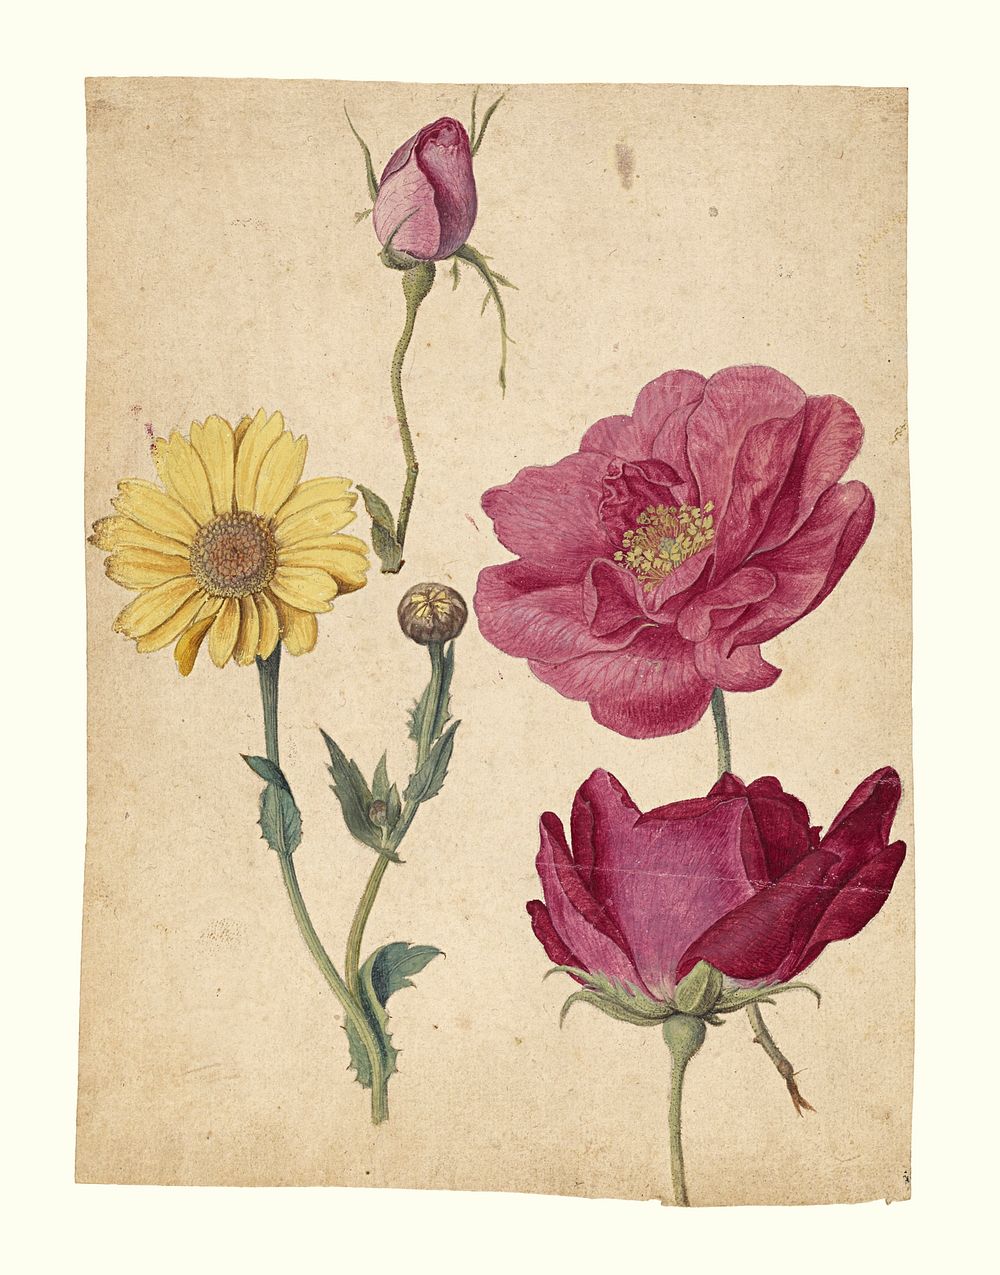 A Sheet of Studies with French Roses and an Oxeye Daisy; Jacques Le Moyne de Morgues (French, about 1533 - 1588)